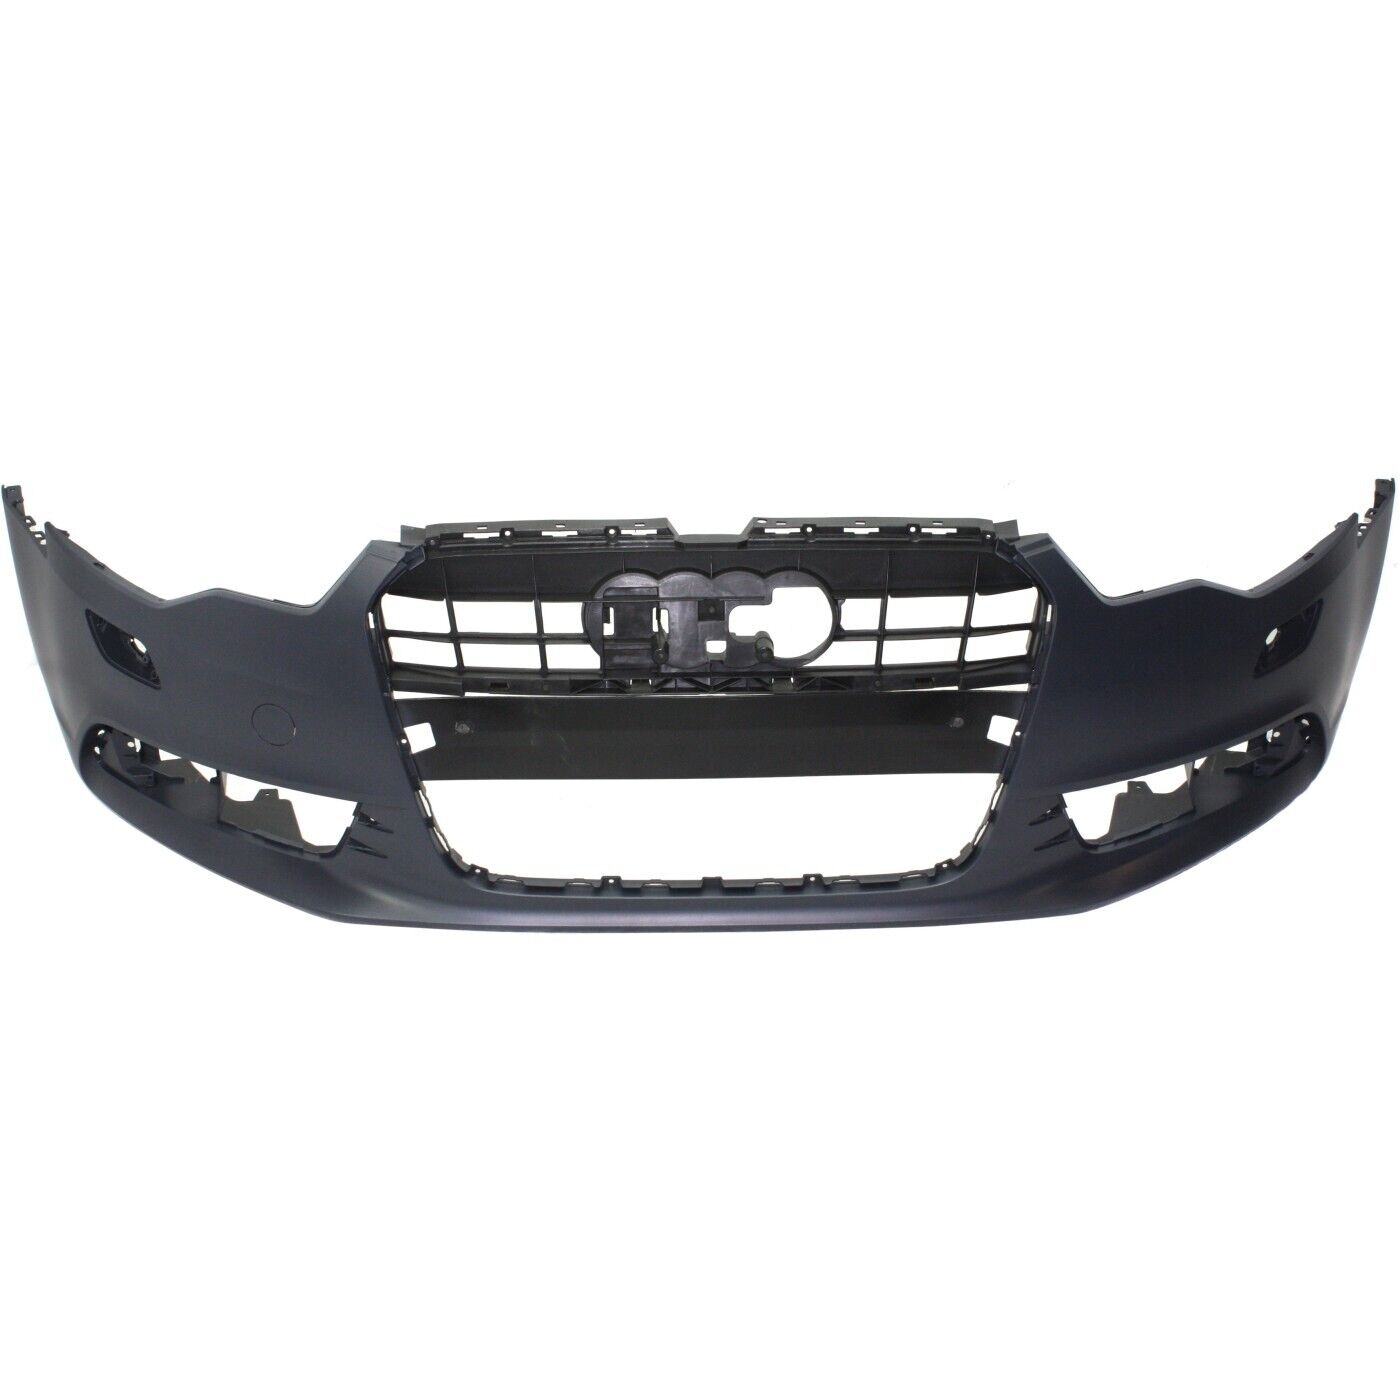 Bumper Cover For 2012-15 Audi A6 w/ Fog Light Holes Front Plastic Paint To Match